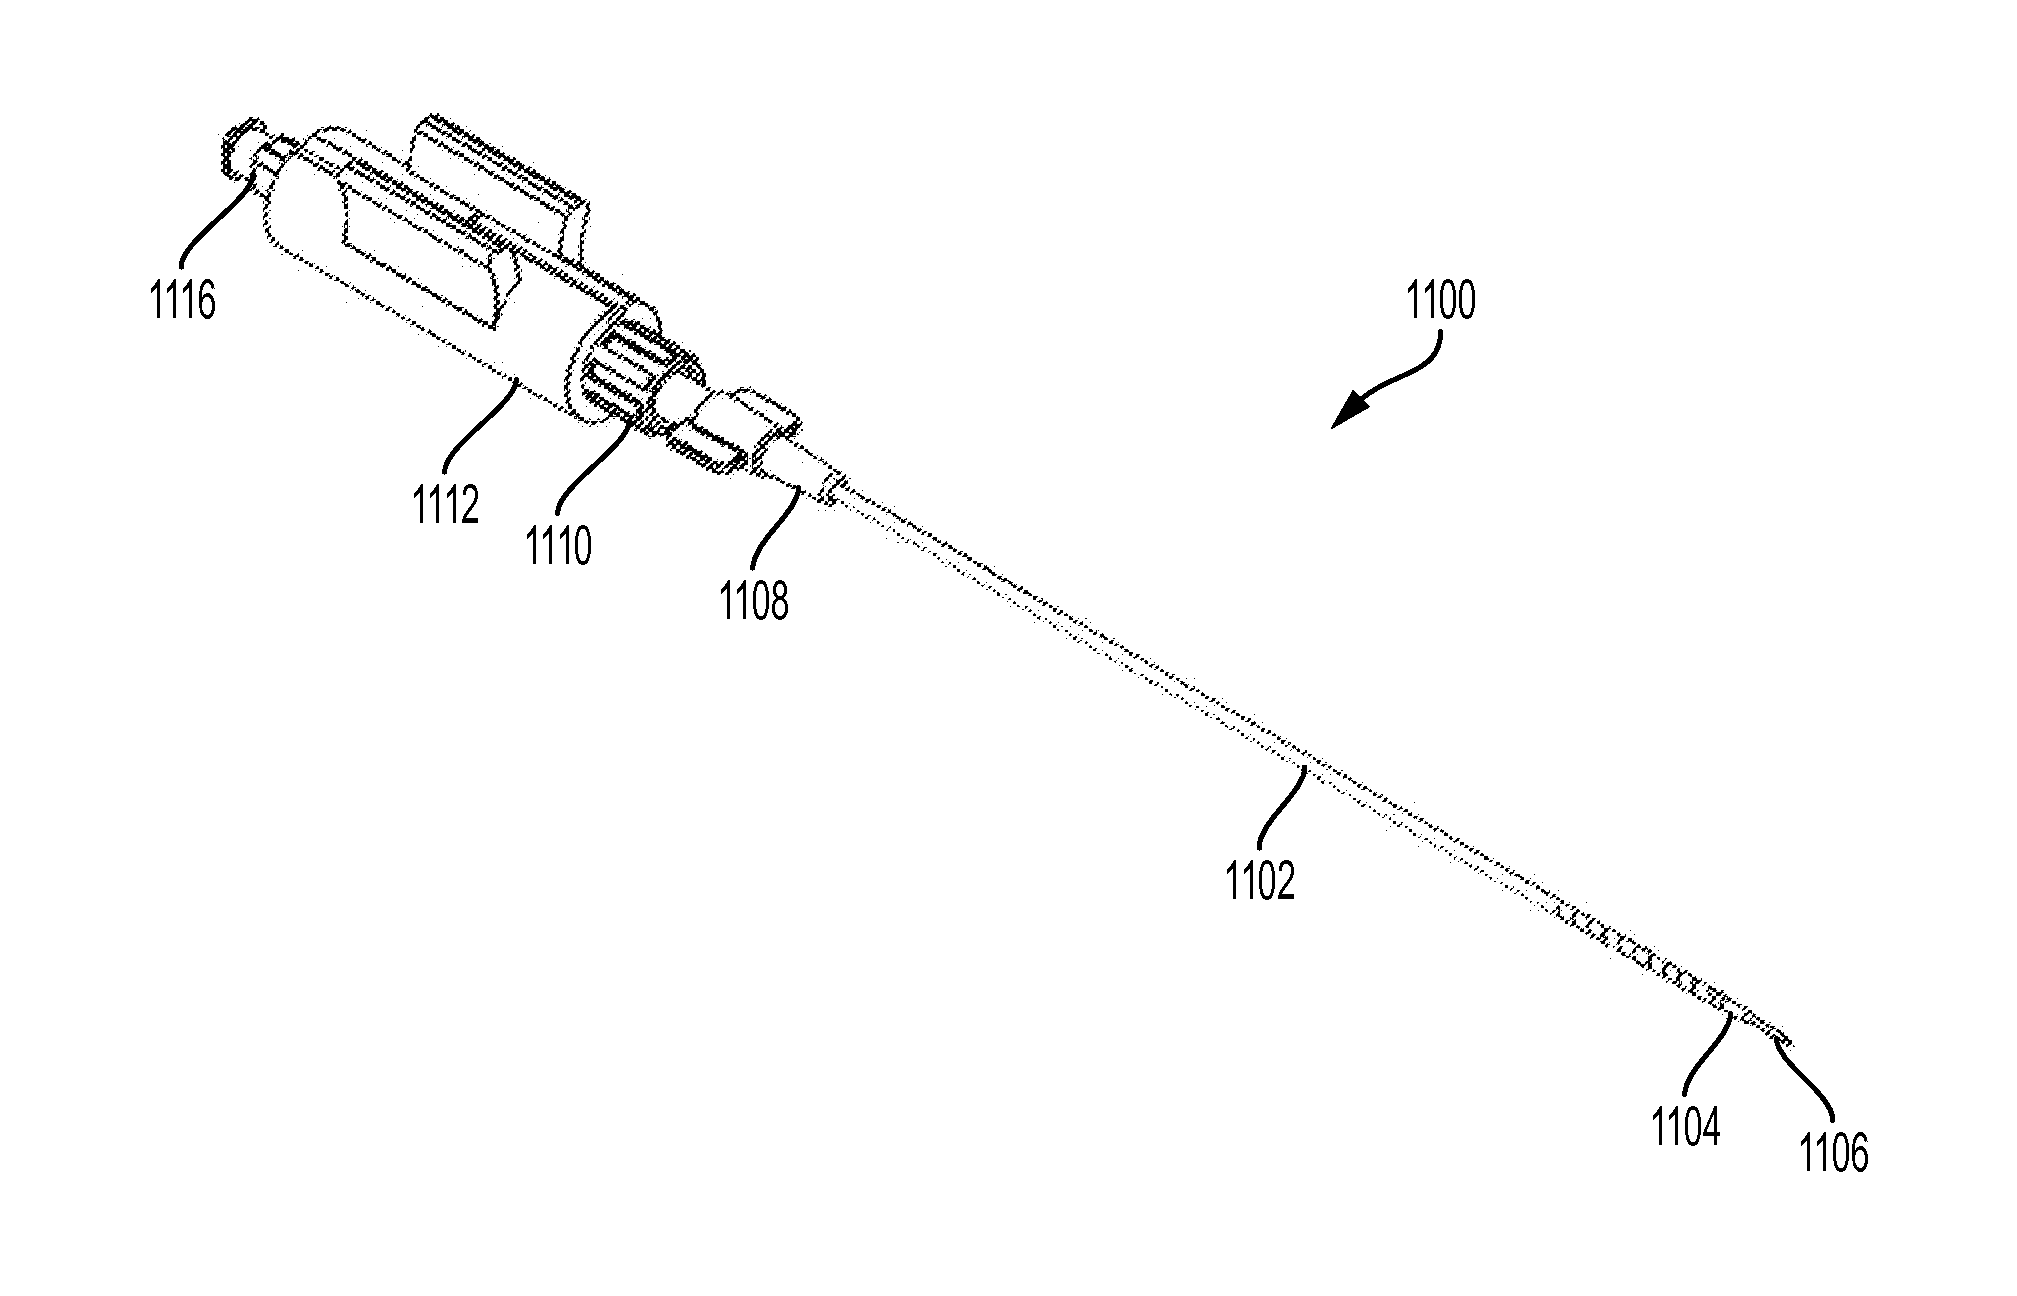 Pericardial access devices and methods